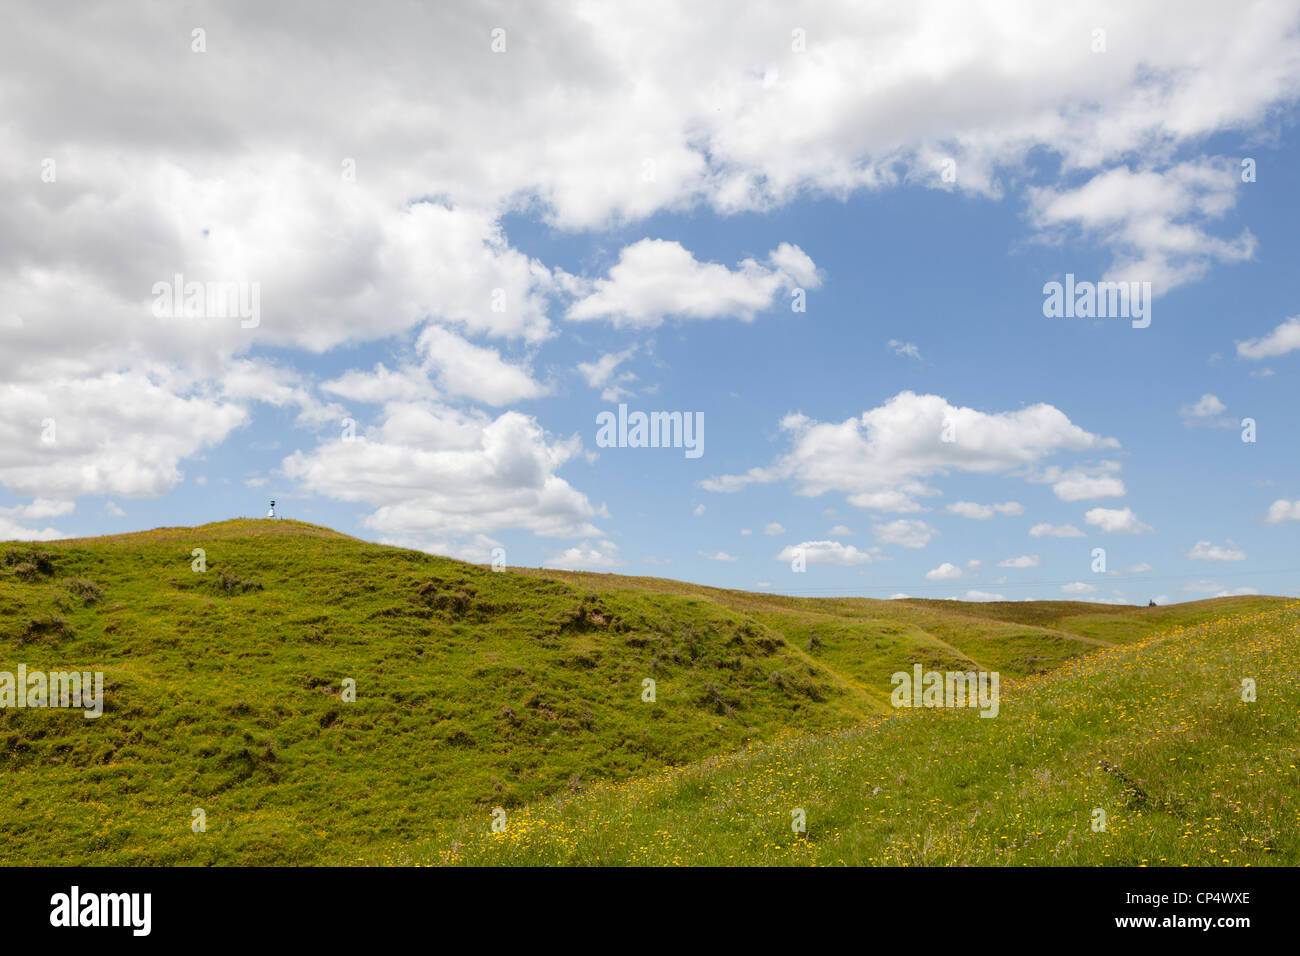 A pastoral scene with blue sky, fluffy clouds, and green grass fields in northern New Zealand Stock Photo